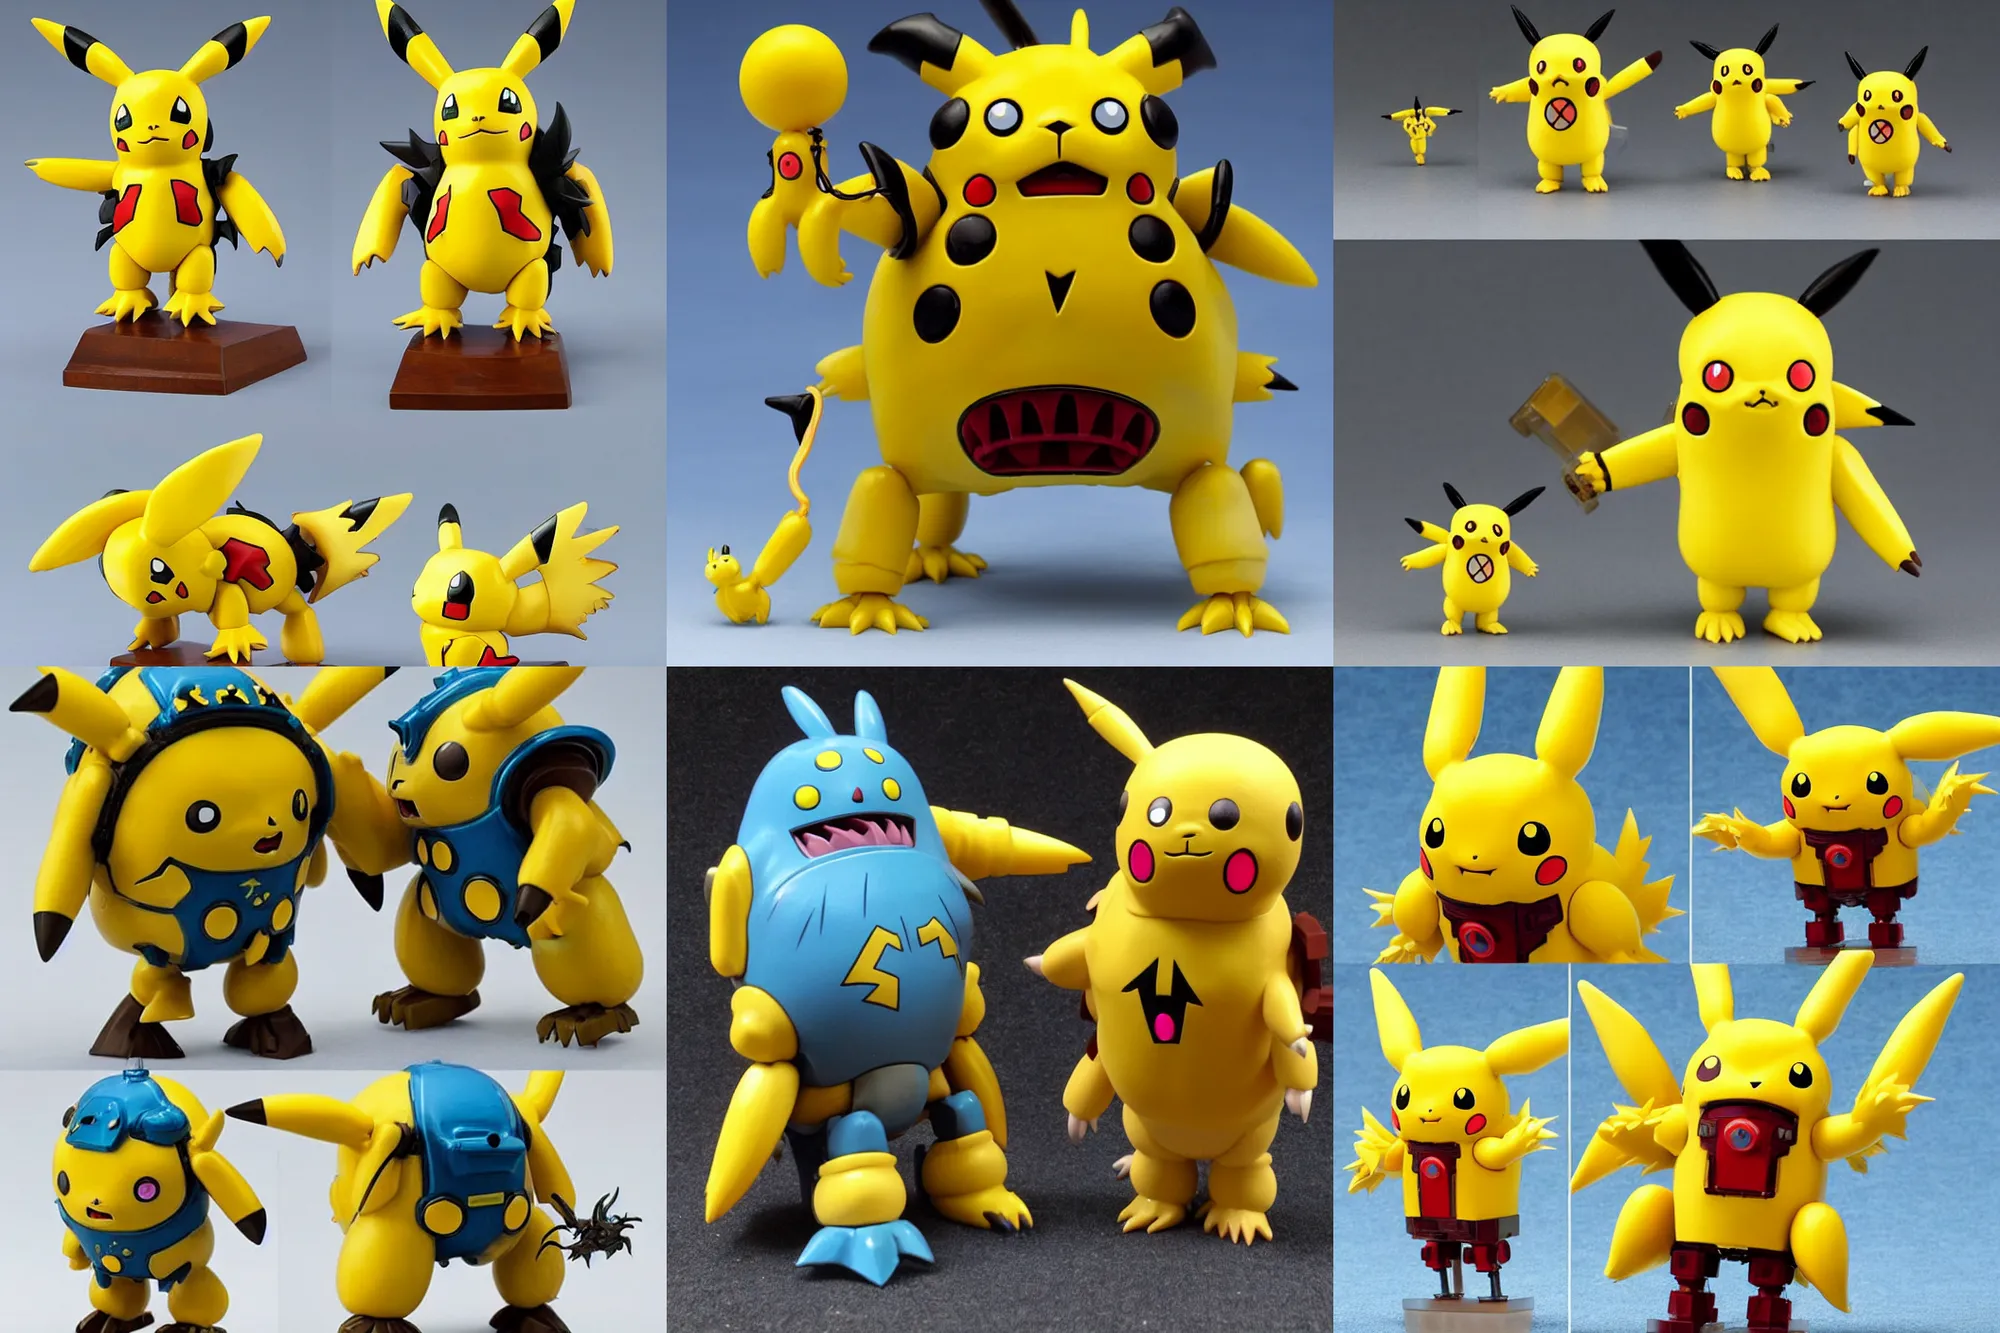 Prompt: A Lovecraftian scary giant mechanized adorable Pikachu from Studio Ghibli Howl's Moving Castle (2004) as a 1980's Kenner style action figure, 5 points of articulation, full body, 4k, highly detailed. award winning sci-fi. look at all that detail!